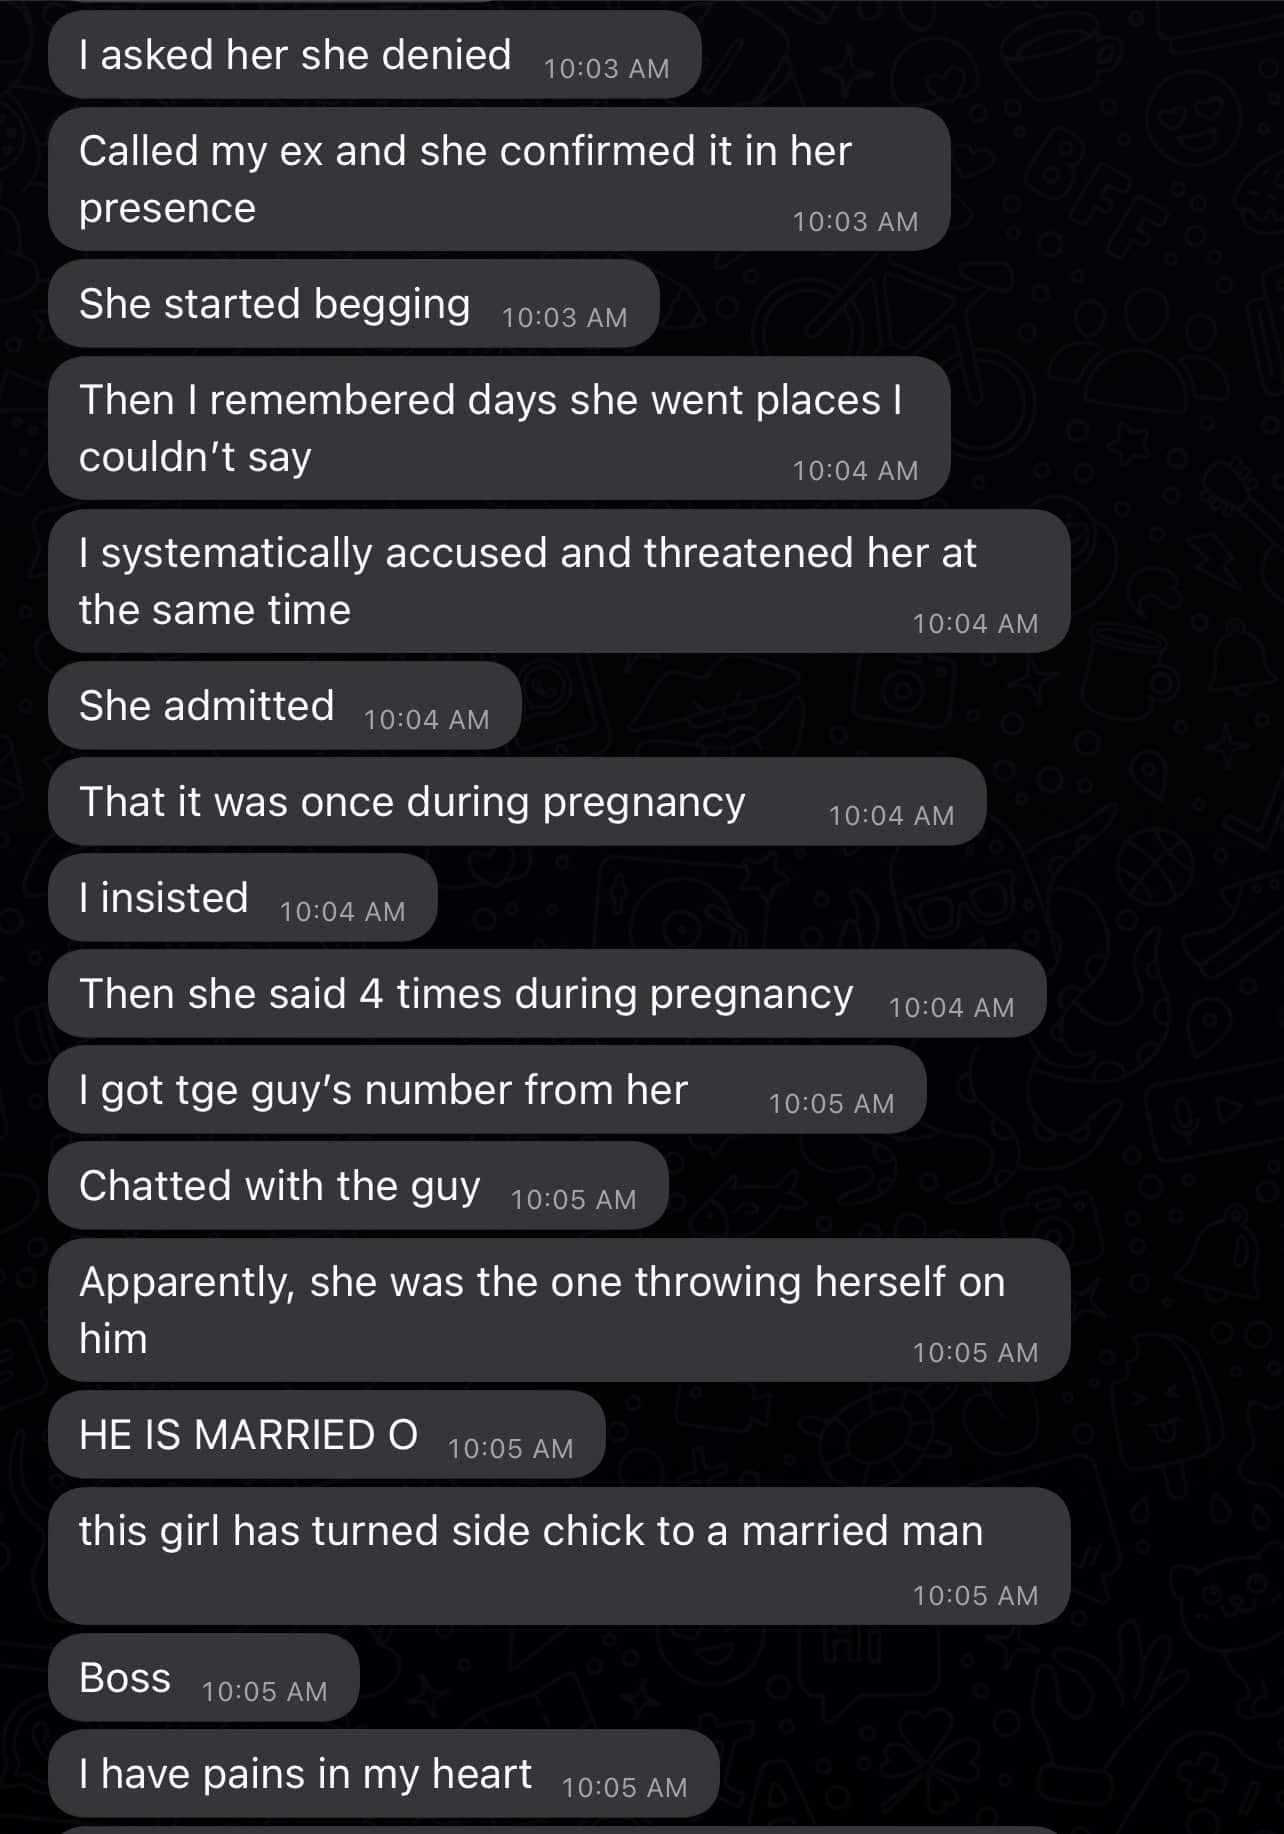 Man depressed as he finds out pregnant girlfriend is cheating with multiple partners